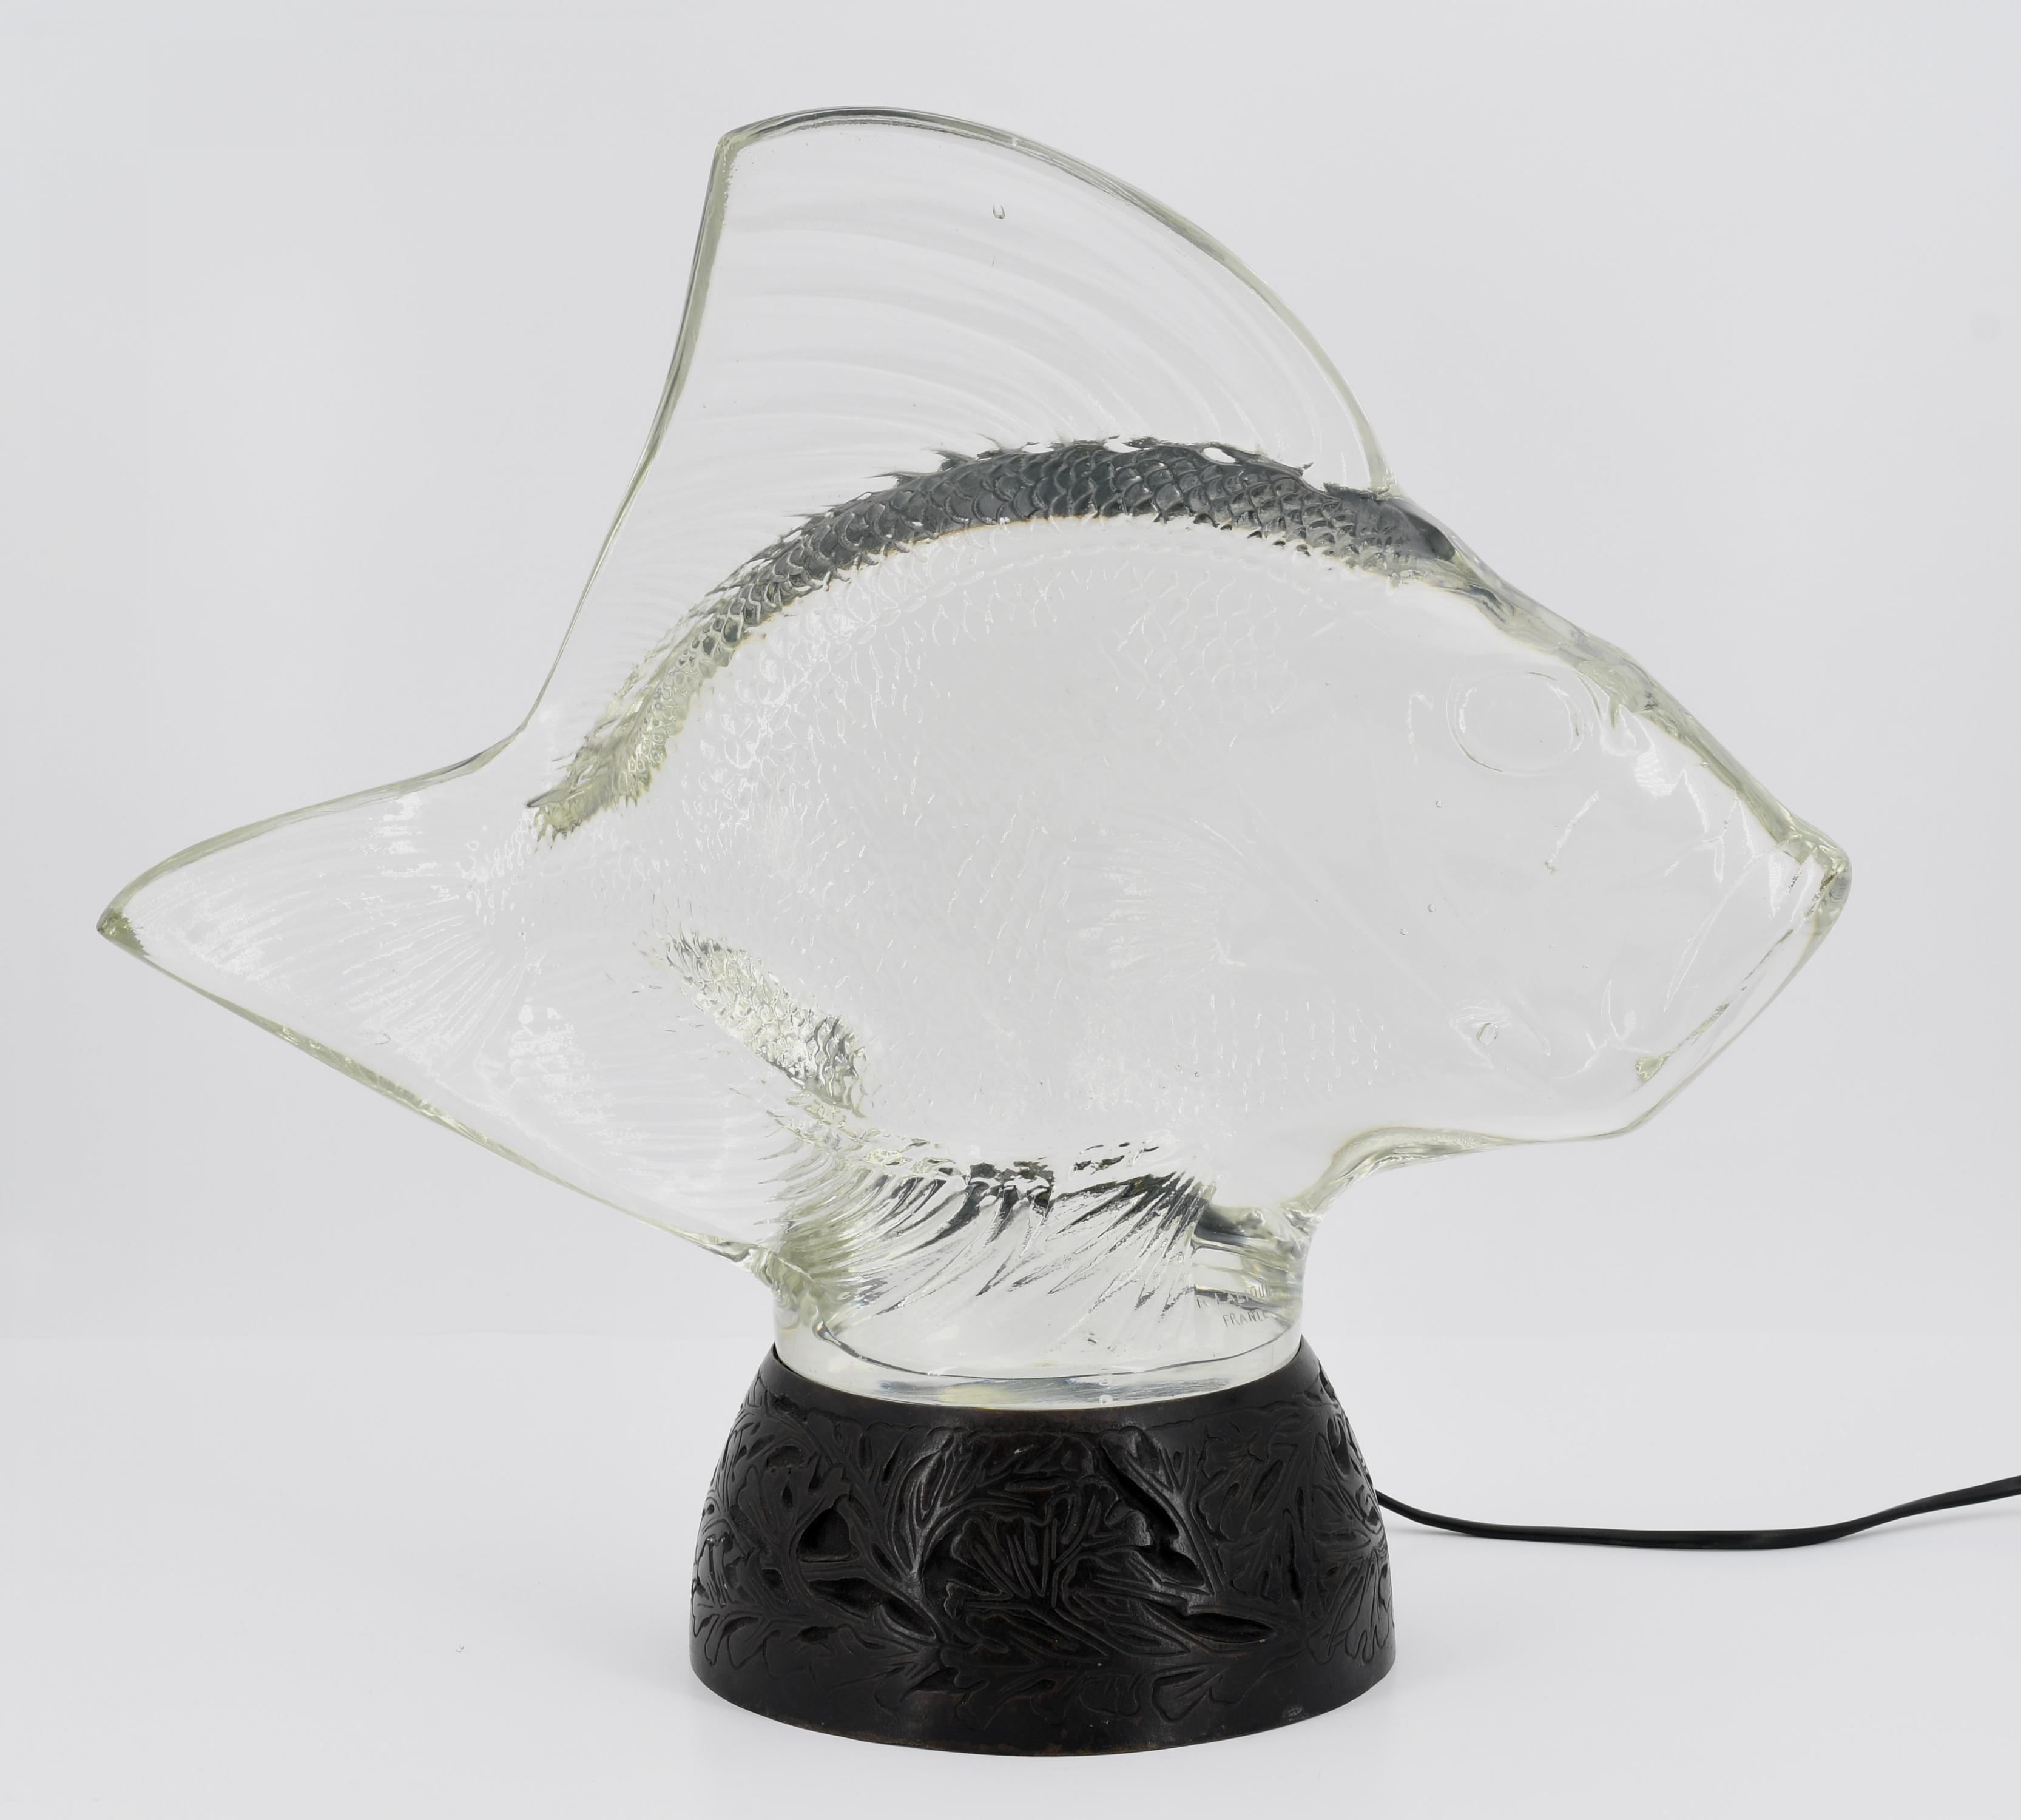 Table lamp "Gros Poisson, Vagues" - Image 2 of 6